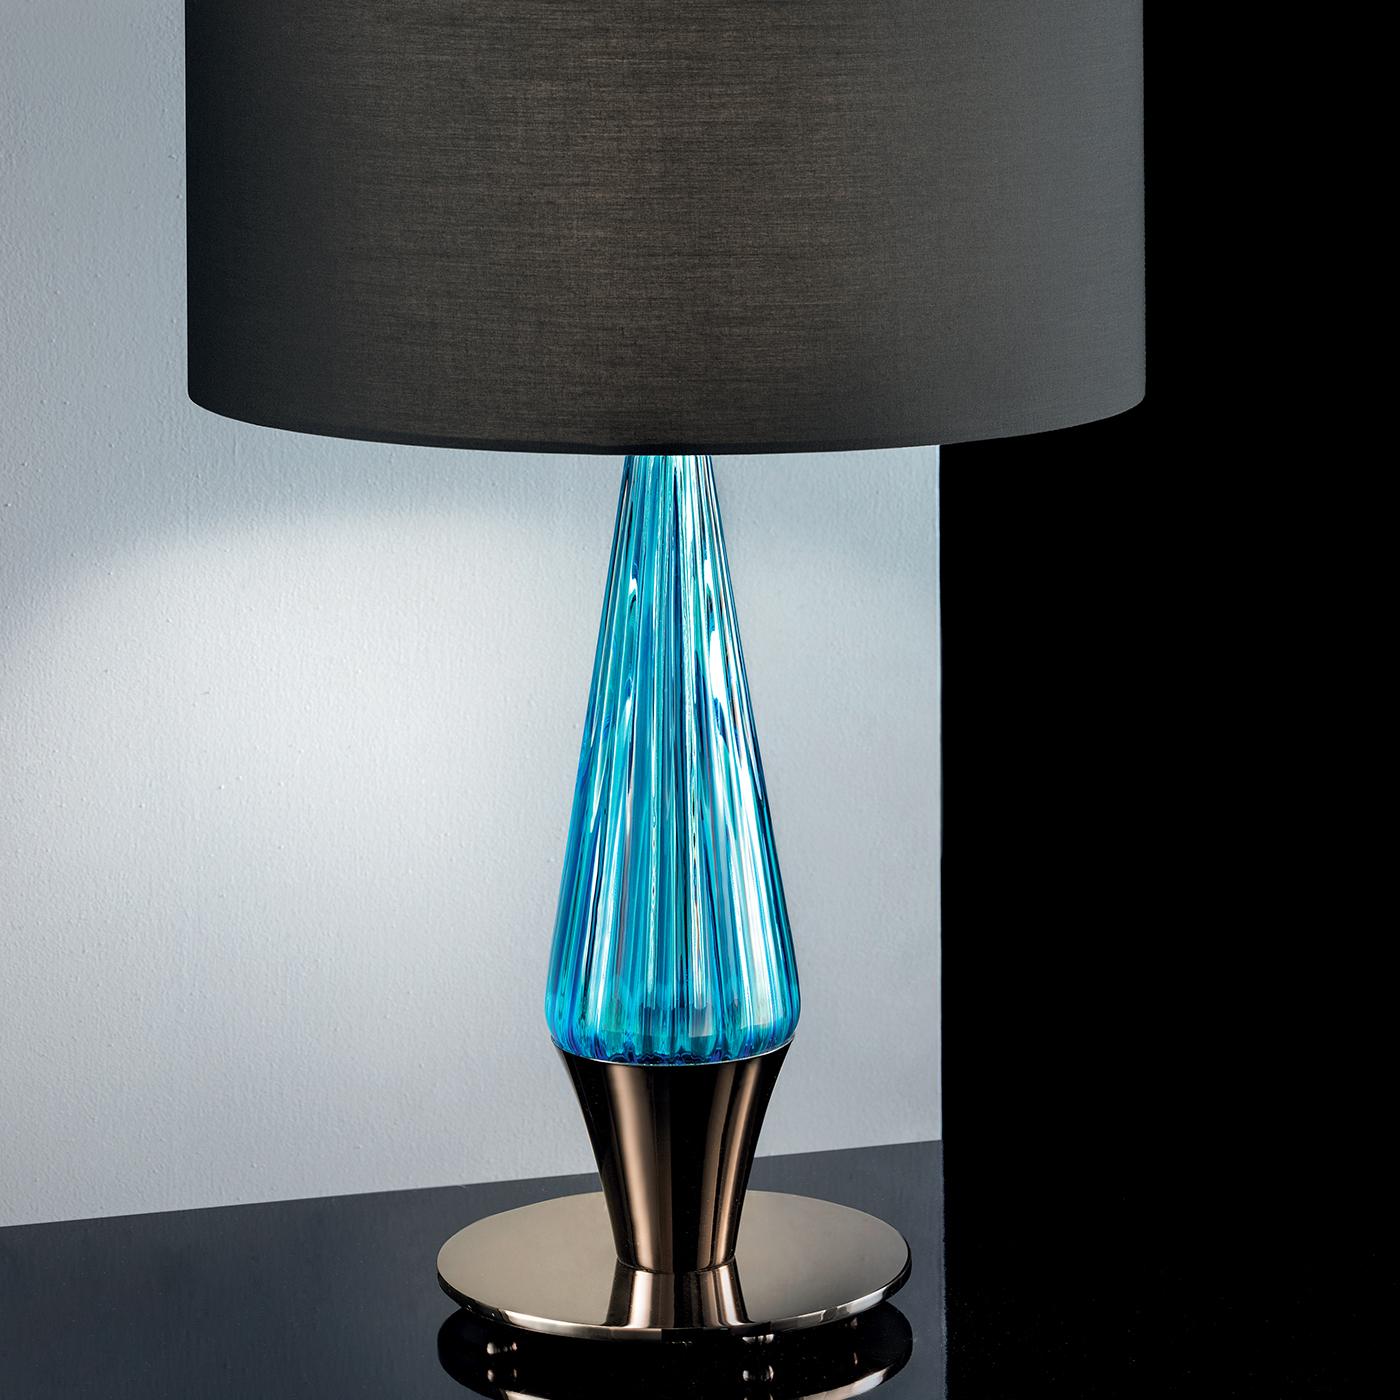 This lamp is characterized by an innovative conical shaft with a rectangular section and a short cylindrical lampshade in gray polycotton fabric and pvc. It stands out thanks to its aquamarine details that give a splash of freshness to its design.